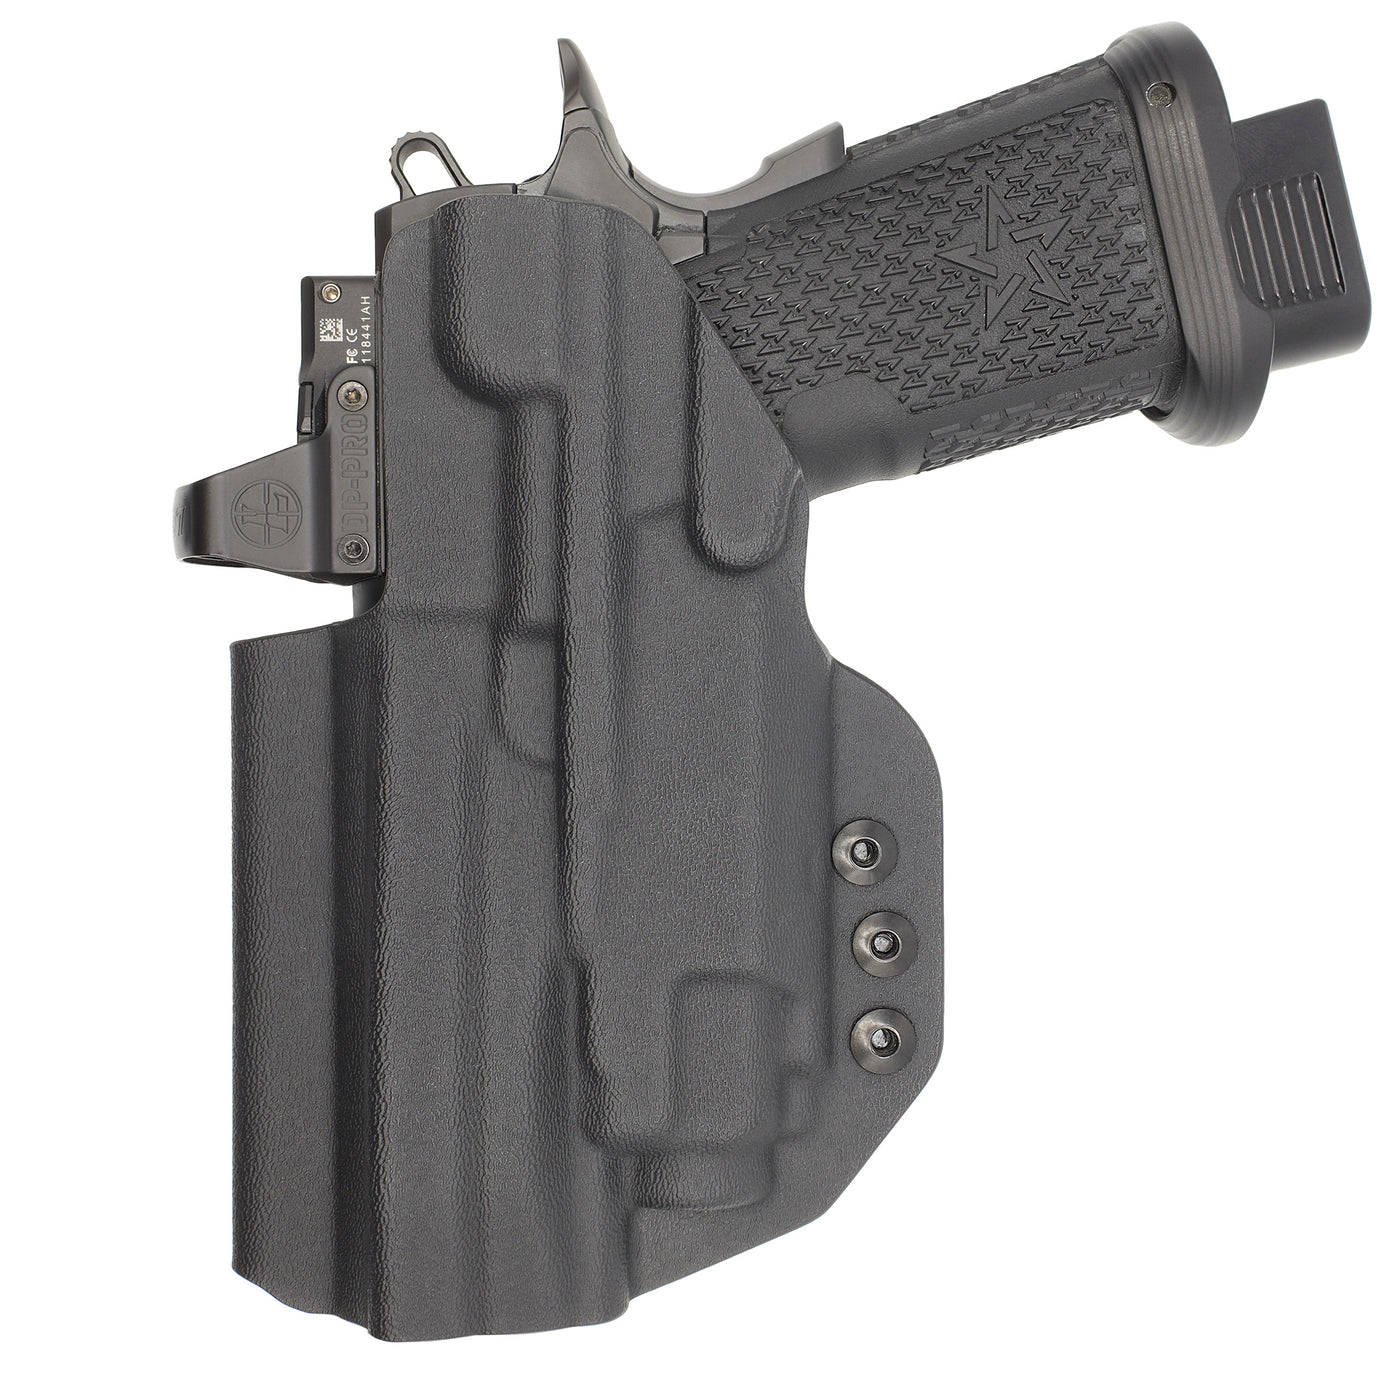 C&G Holsters custom IWB tactical 2011 streamlight TLR8 holstered back view